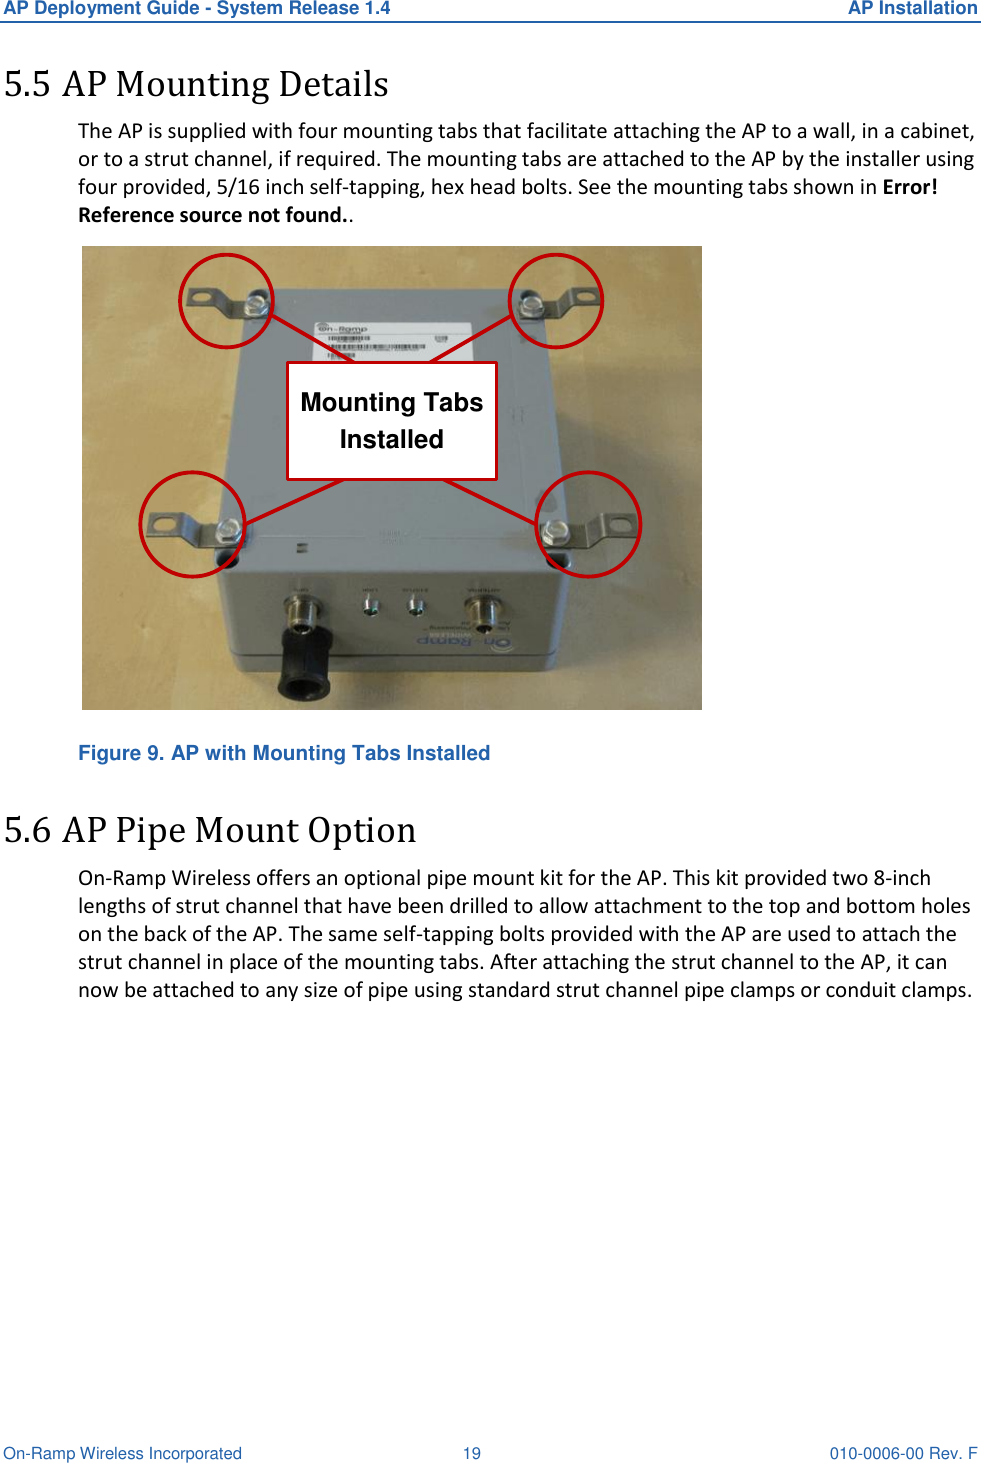 AP Deployment Guide - System Release 1.4  AP Installation On-Ramp Wireless Incorporated  19 010-0006-00 Rev. F 5.5 AP Mounting Details The AP is supplied with four mounting tabs that facilitate attaching the AP to a wall, in a cabinet, or to a strut channel, if required. The mounting tabs are attached to the AP by the installer using four provided, 5/16 inch self-tapping, hex head bolts. See the mounting tabs shown in Error! Reference source not found.. Mounting Tabs Installed Figure 9. AP with Mounting Tabs Installed 5.6 AP Pipe Mount Option On-Ramp Wireless offers an optional pipe mount kit for the AP. This kit provided two 8-inch lengths of strut channel that have been drilled to allow attachment to the top and bottom holes on the back of the AP. The same self-tapping bolts provided with the AP are used to attach the strut channel in place of the mounting tabs. After attaching the strut channel to the AP, it can now be attached to any size of pipe using standard strut channel pipe clamps or conduit clamps.   